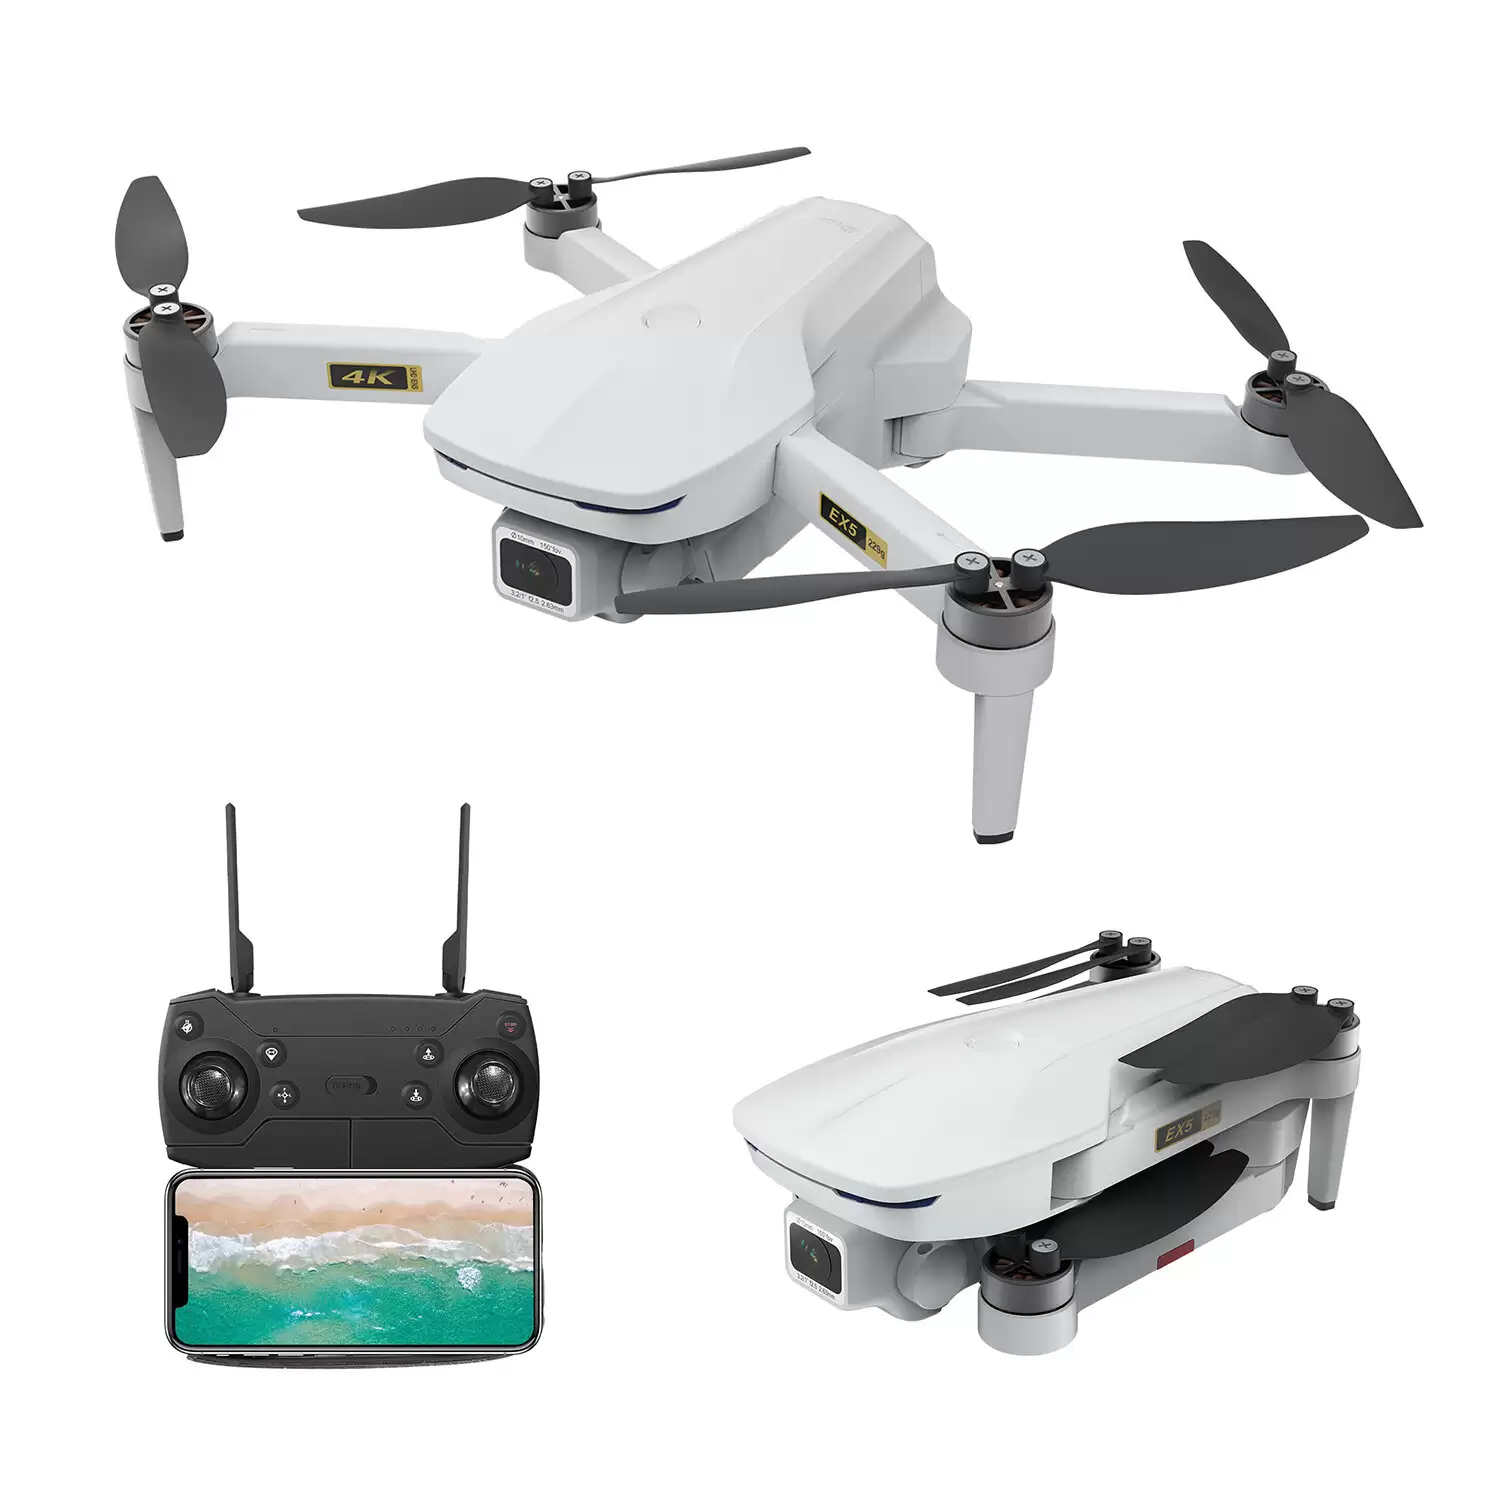 Order In Just $92.95 Eachine Ex5 5g Wifi 1km Fpv Gps With 4k Hd Camera Servo Gimbal 30mins Flight Time 229g Foldable Rc Drone Quadcopter Rtf With This Coupon At Banggood